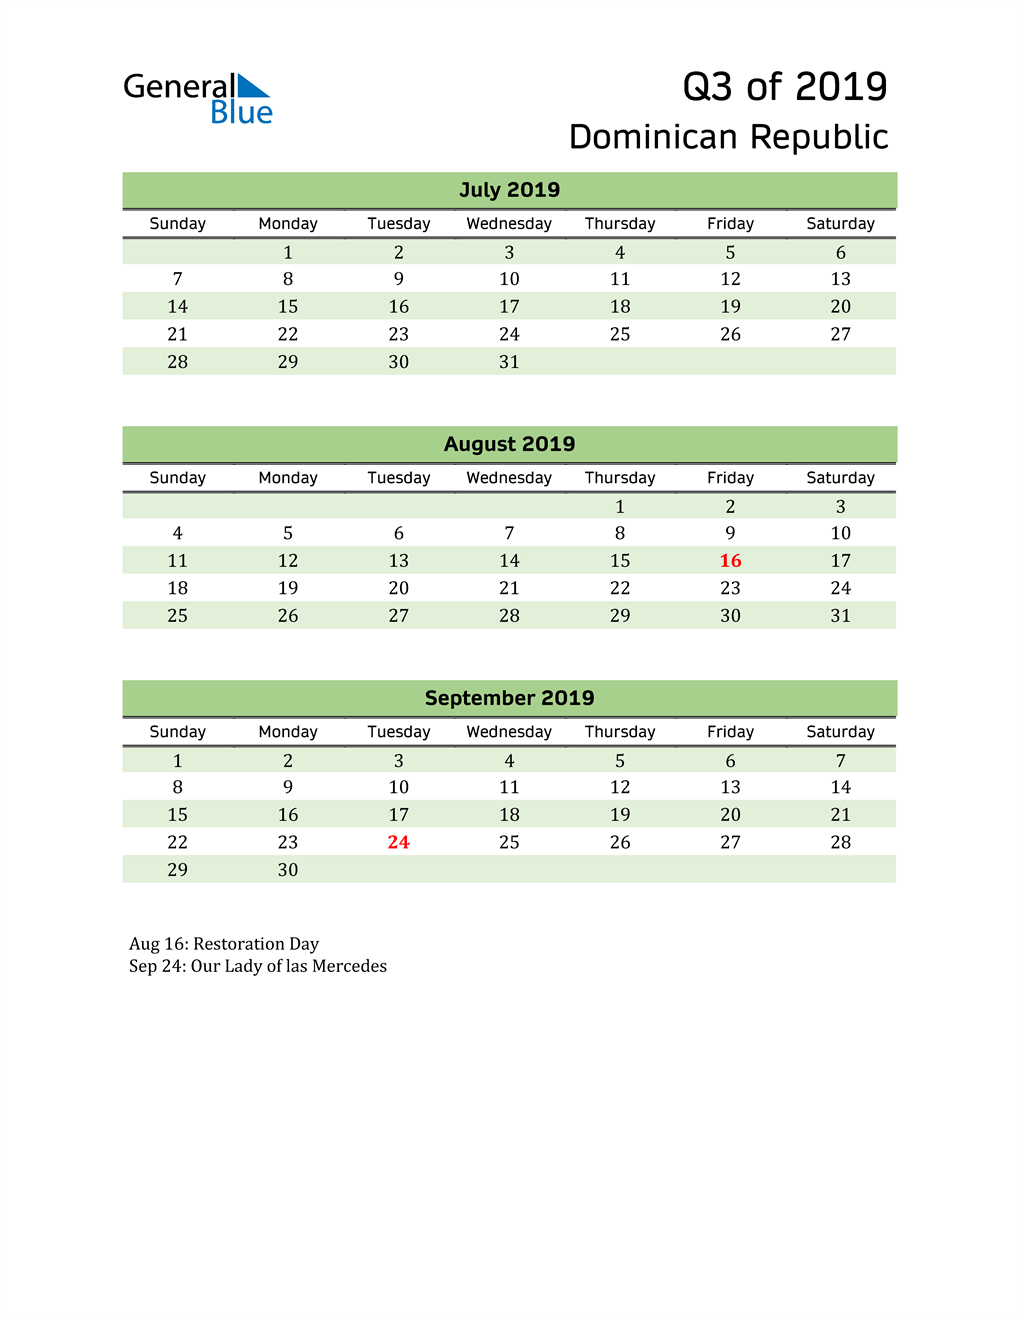  Quarterly Calendar 2019 with Dominican Republic Holidays 